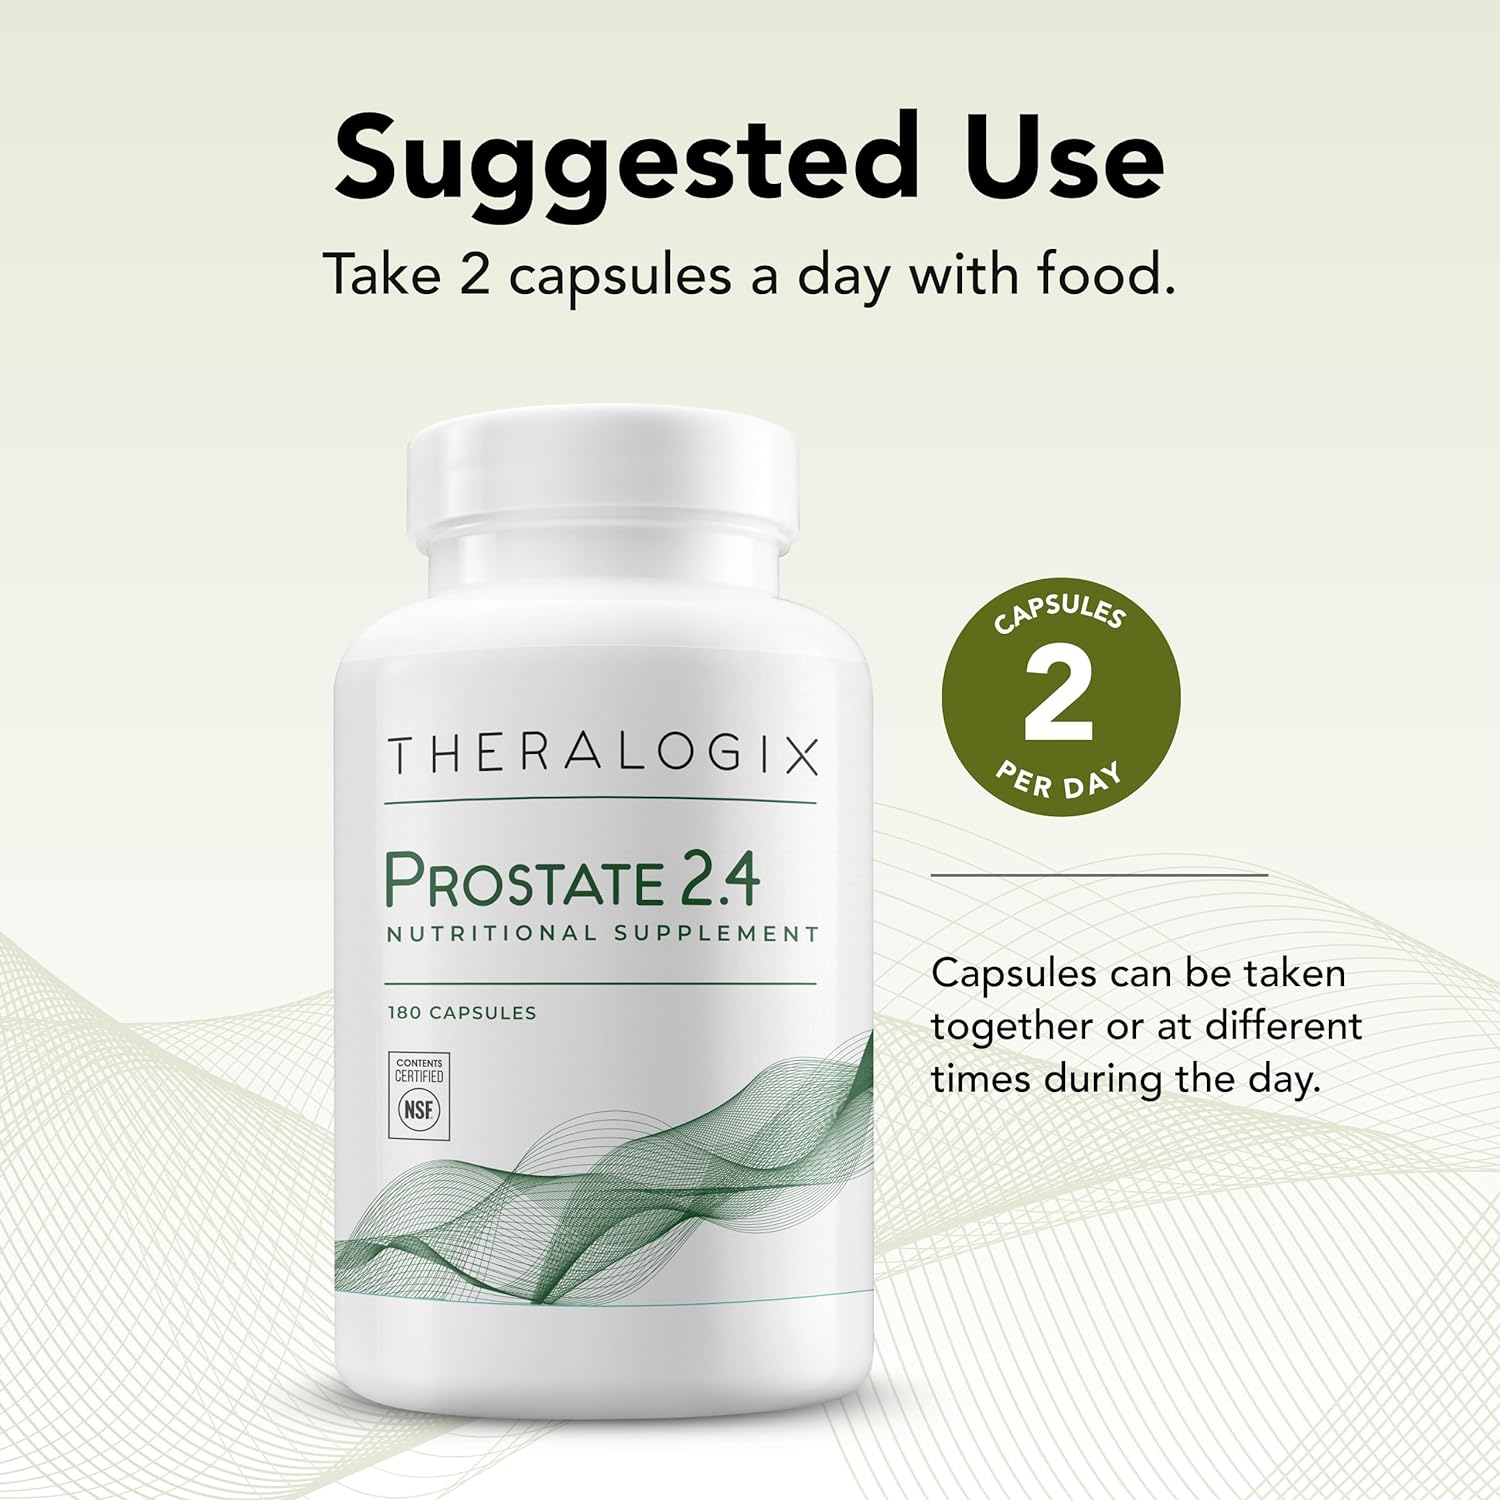 Theralogix Prostate 2.4 Nutritional Supplement - 90-Day Supply - Prostate Health for Men - Supports Healthy Prostate Tissue - Lycopene, Vitamin D3, Selenium & Vitamin E - NSF Certified - 180 Capsules : Health & Household